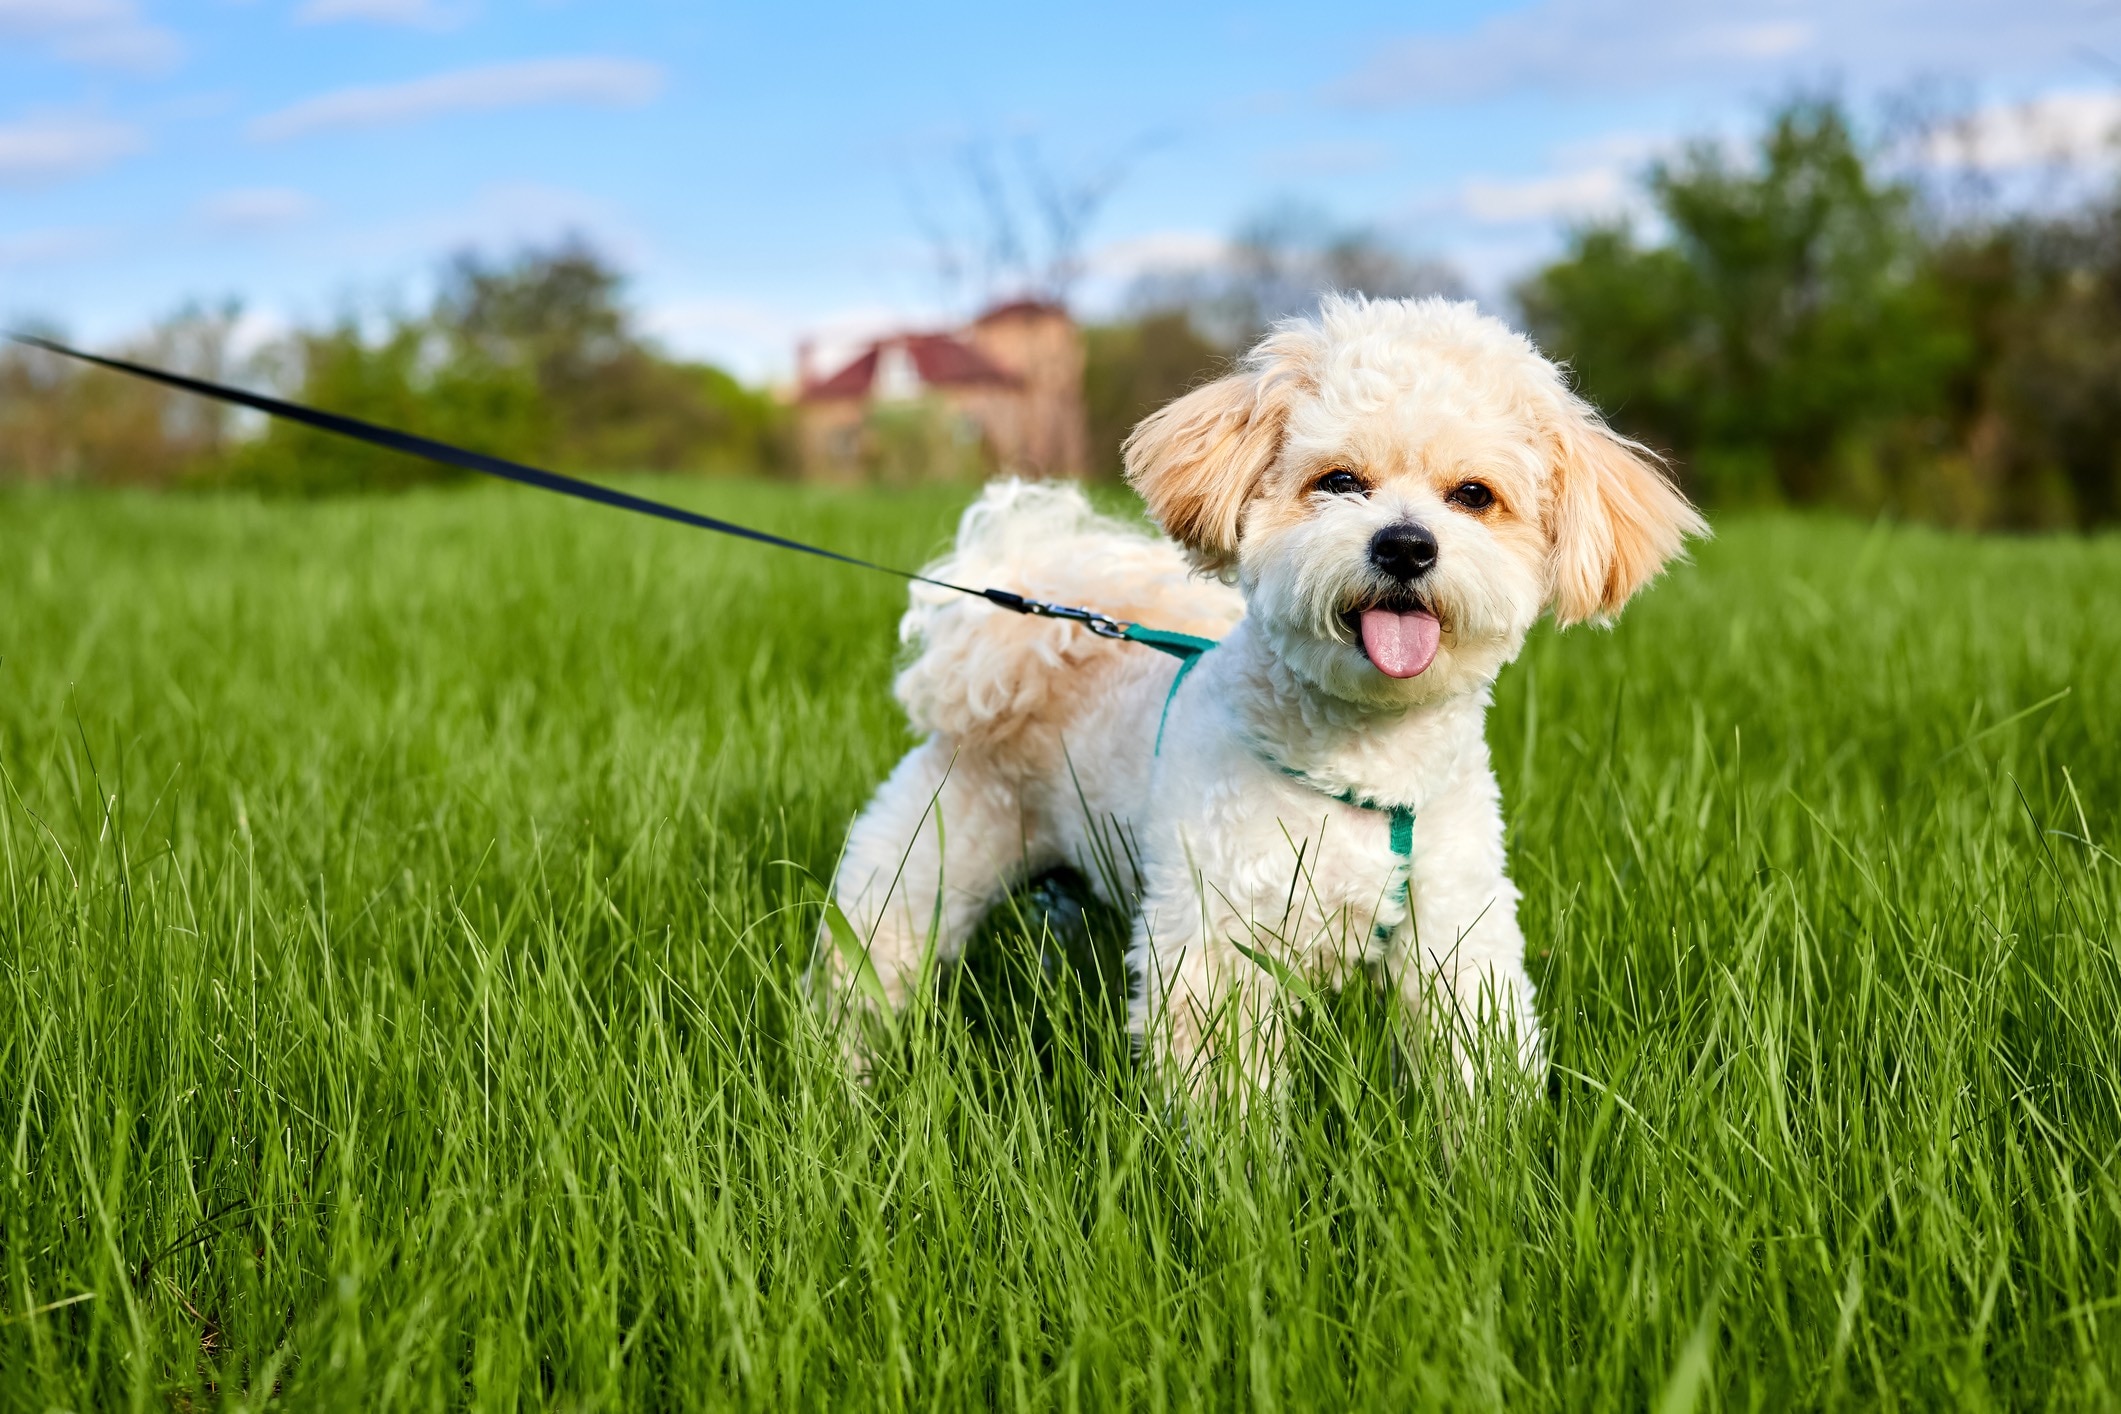 white maltipoo dog on a leash in tall grass